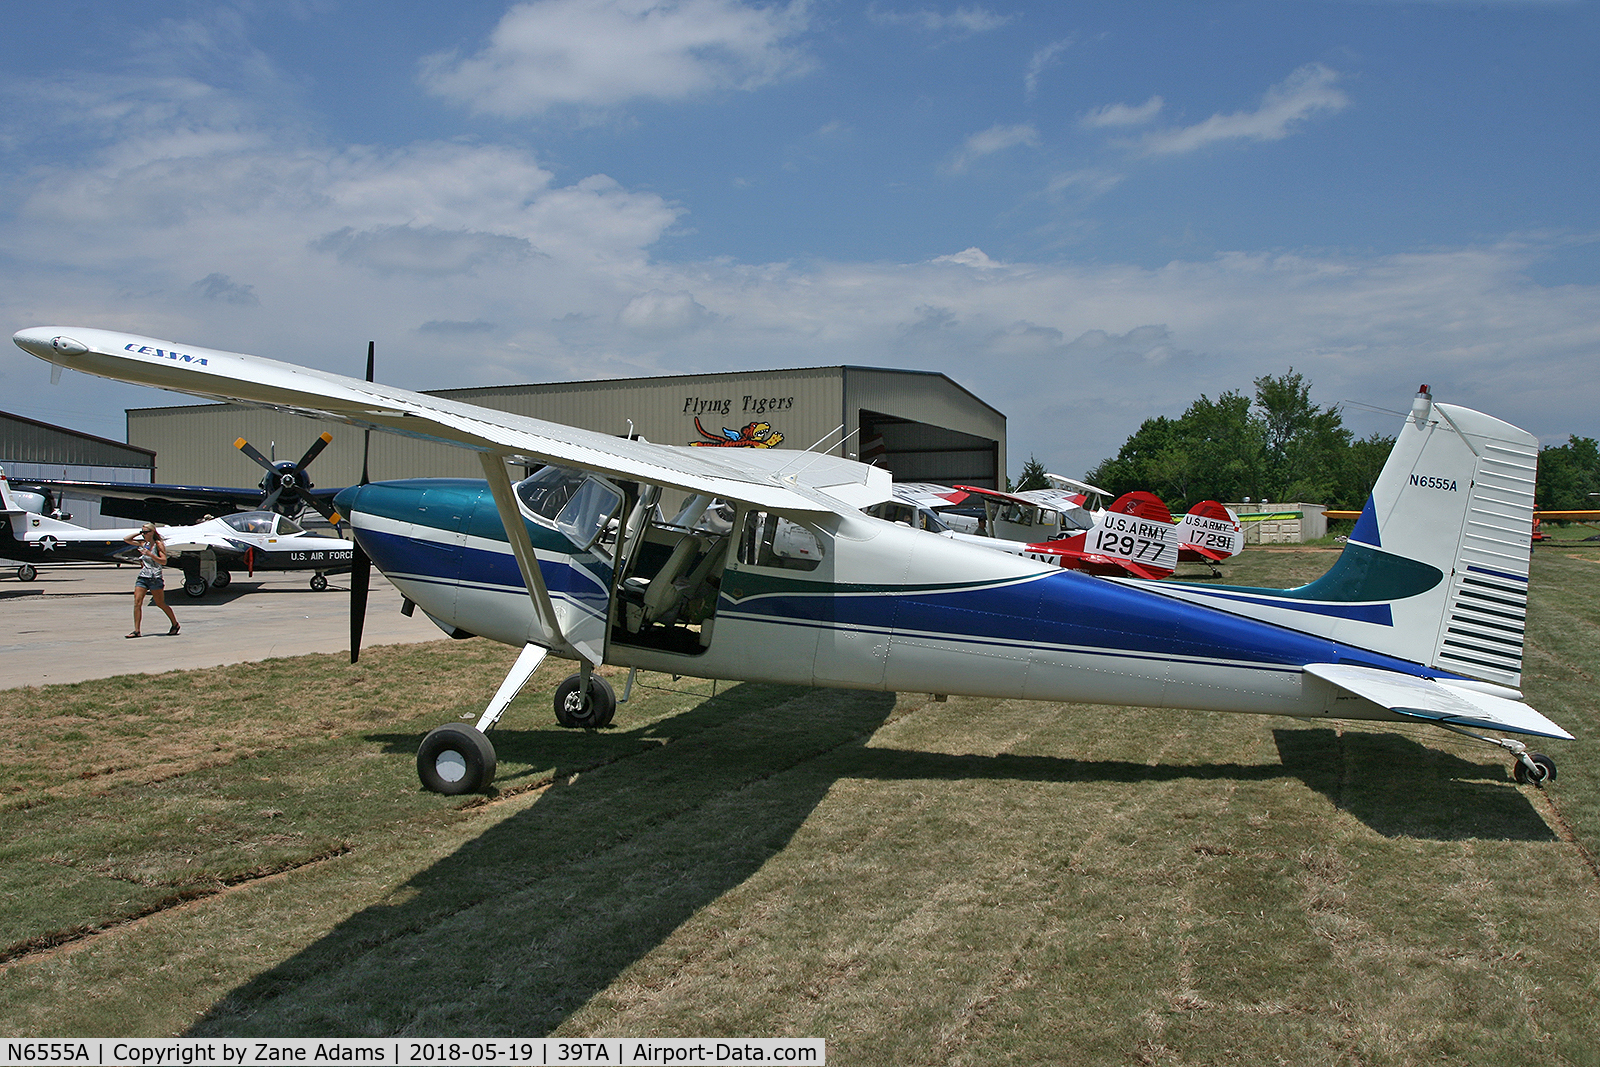 N6555A, 1956 Cessna 180 C/N 32452, At the 2018 Flying Tigers fly-in - Paris, TX